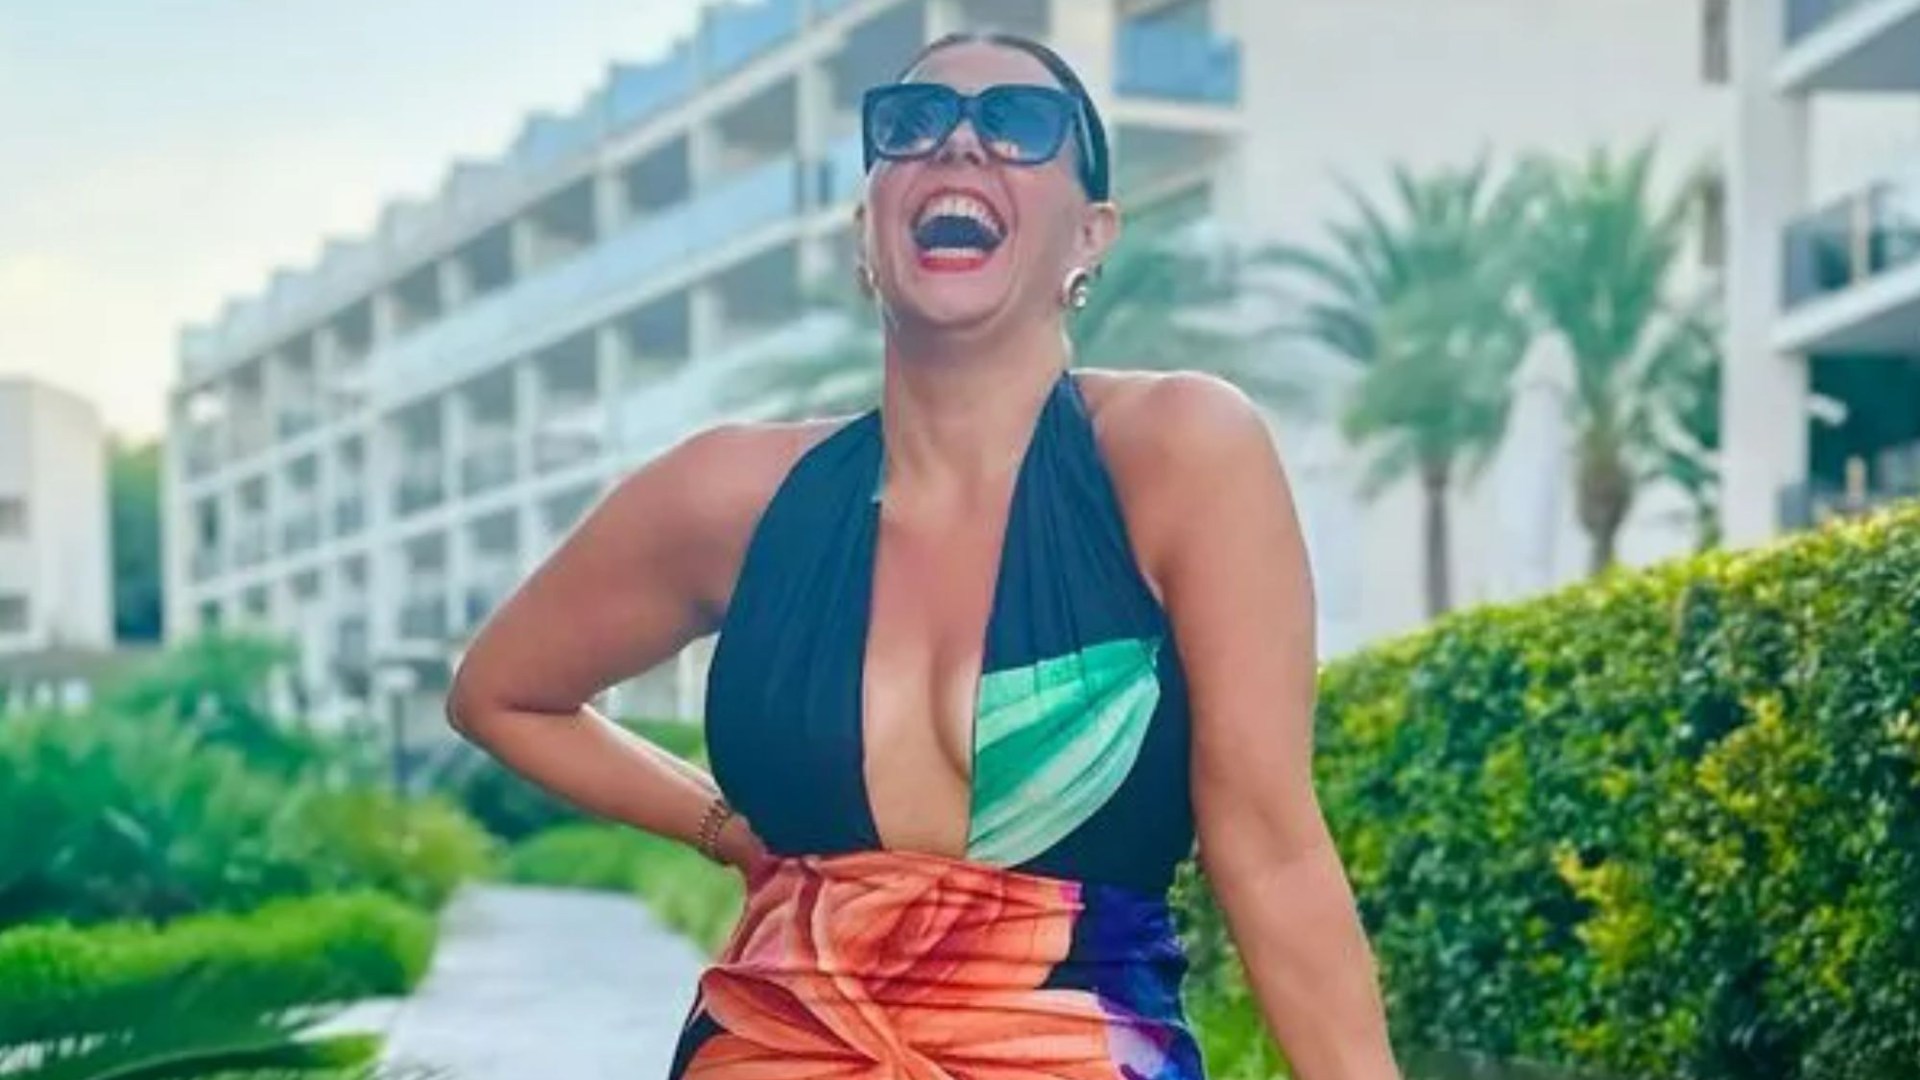 ‘Couldn’t believe it’ LadBaby Mum praises 20 plunge dress that lets her go braless on holiday without any accidents [Video]